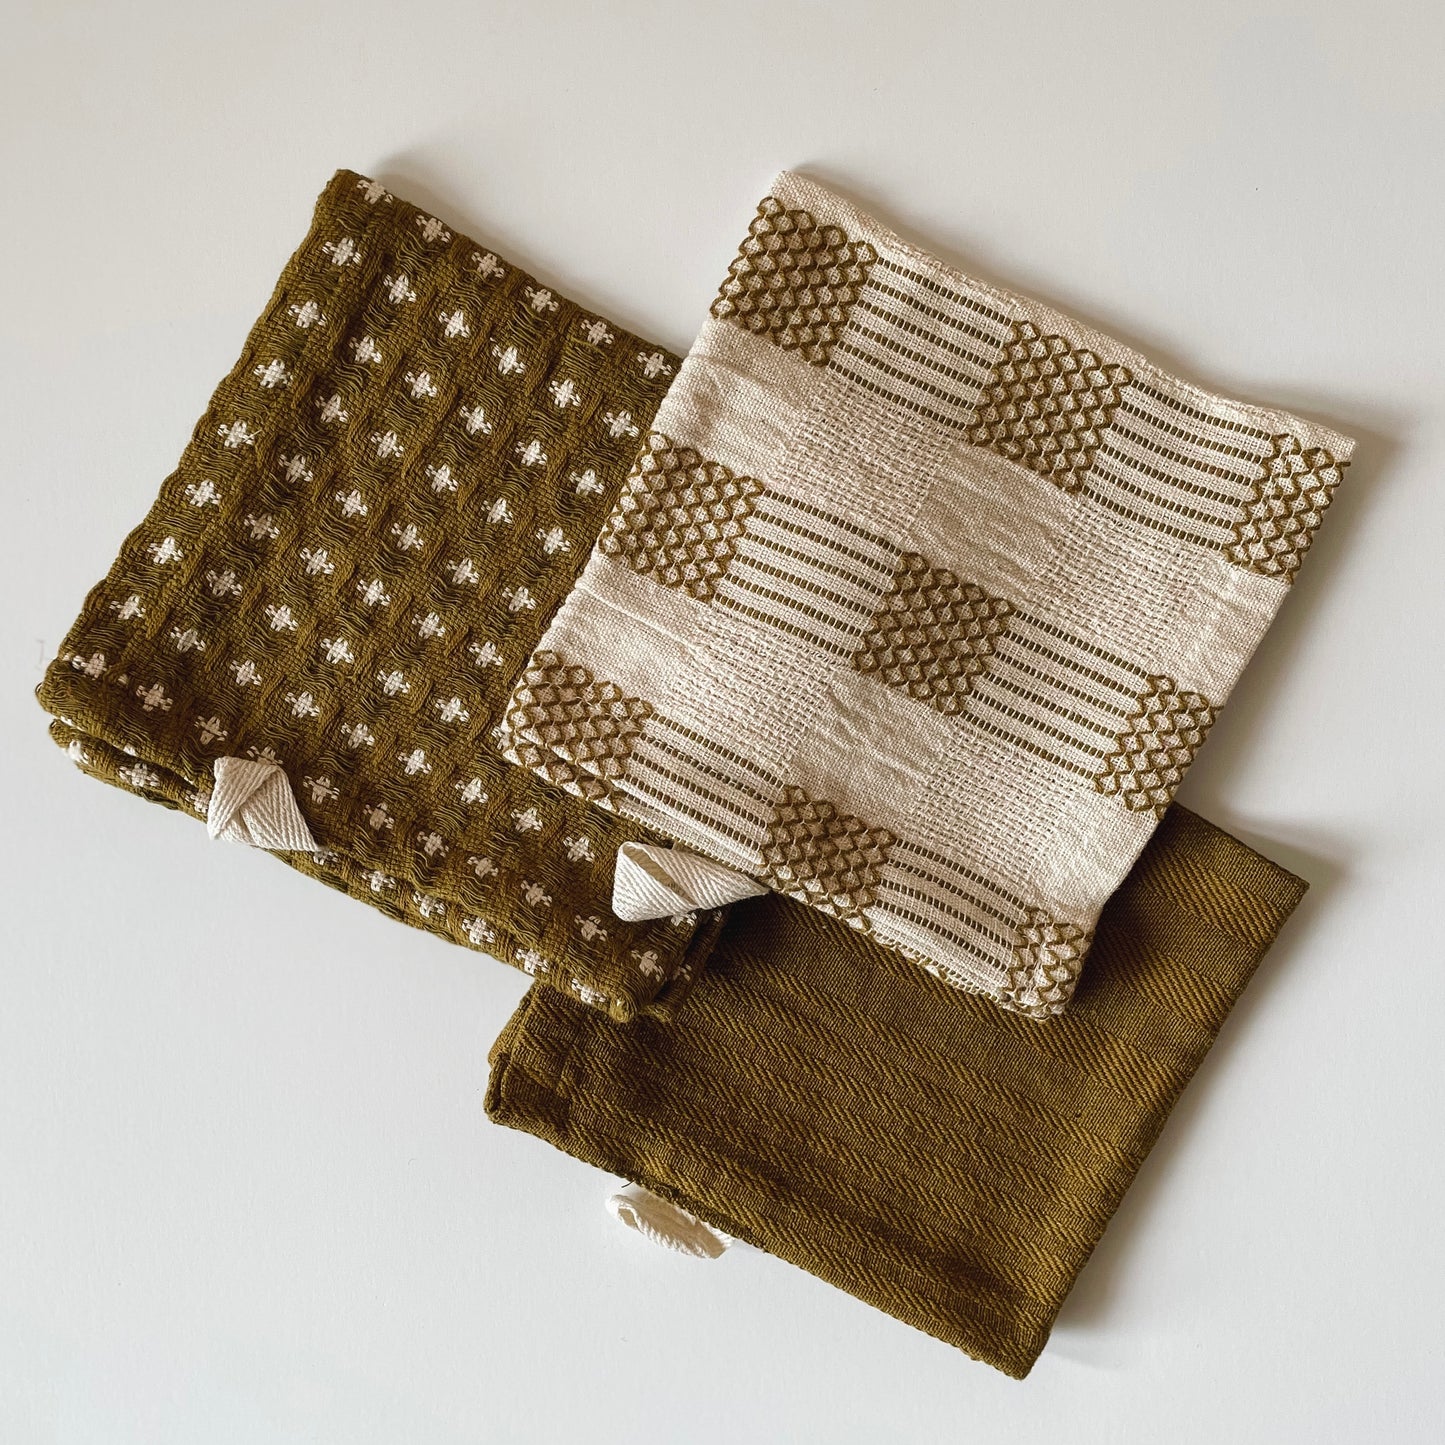 Earth + Stone Woven Cotton Dish Cloths | Set of 3